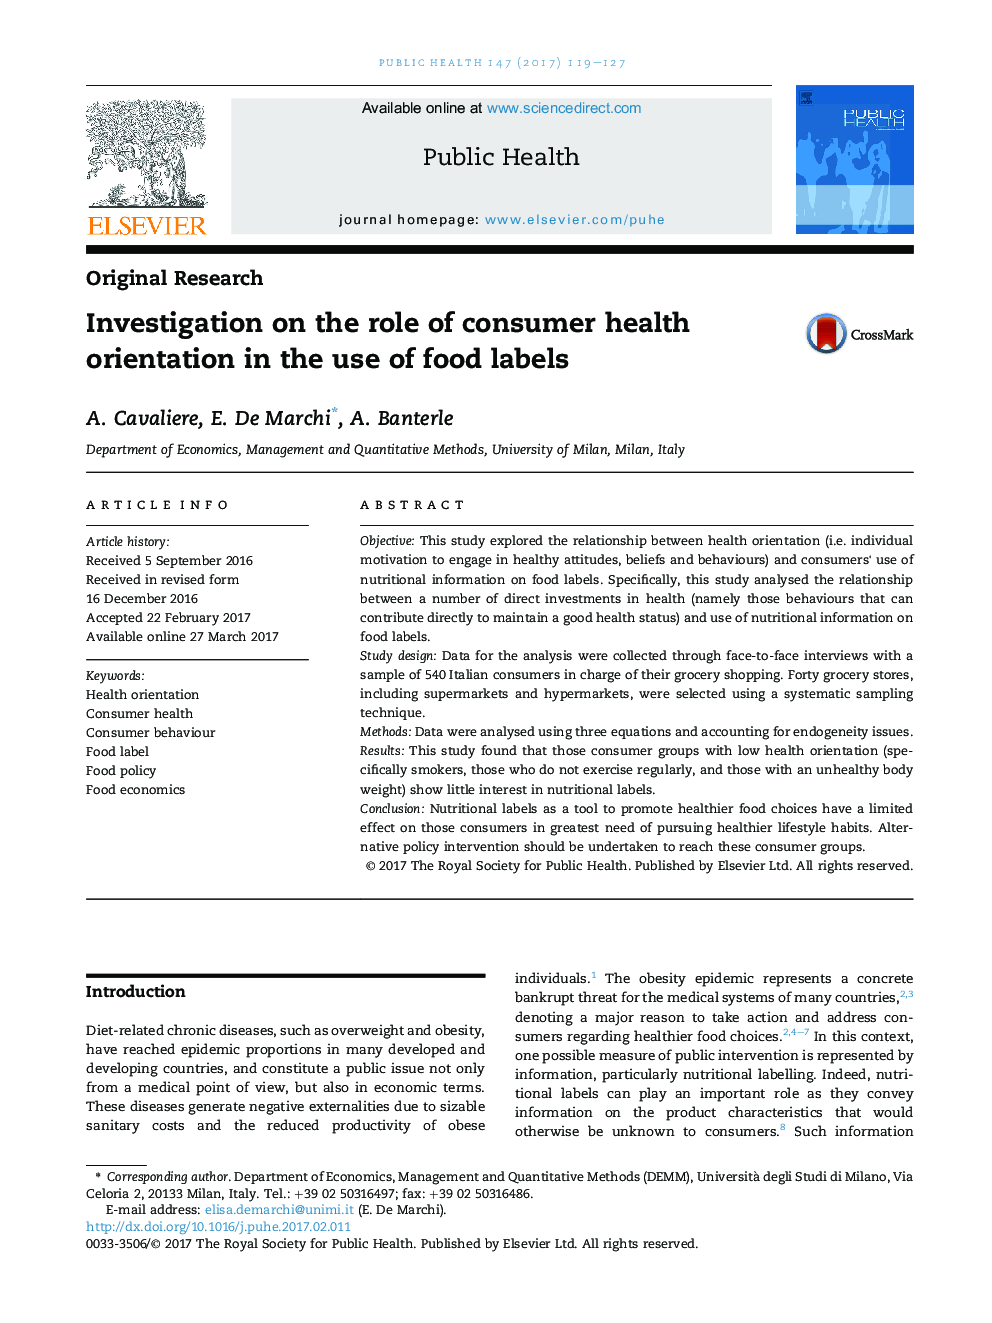 Investigation on the role of consumer health orientation in the use of food labels